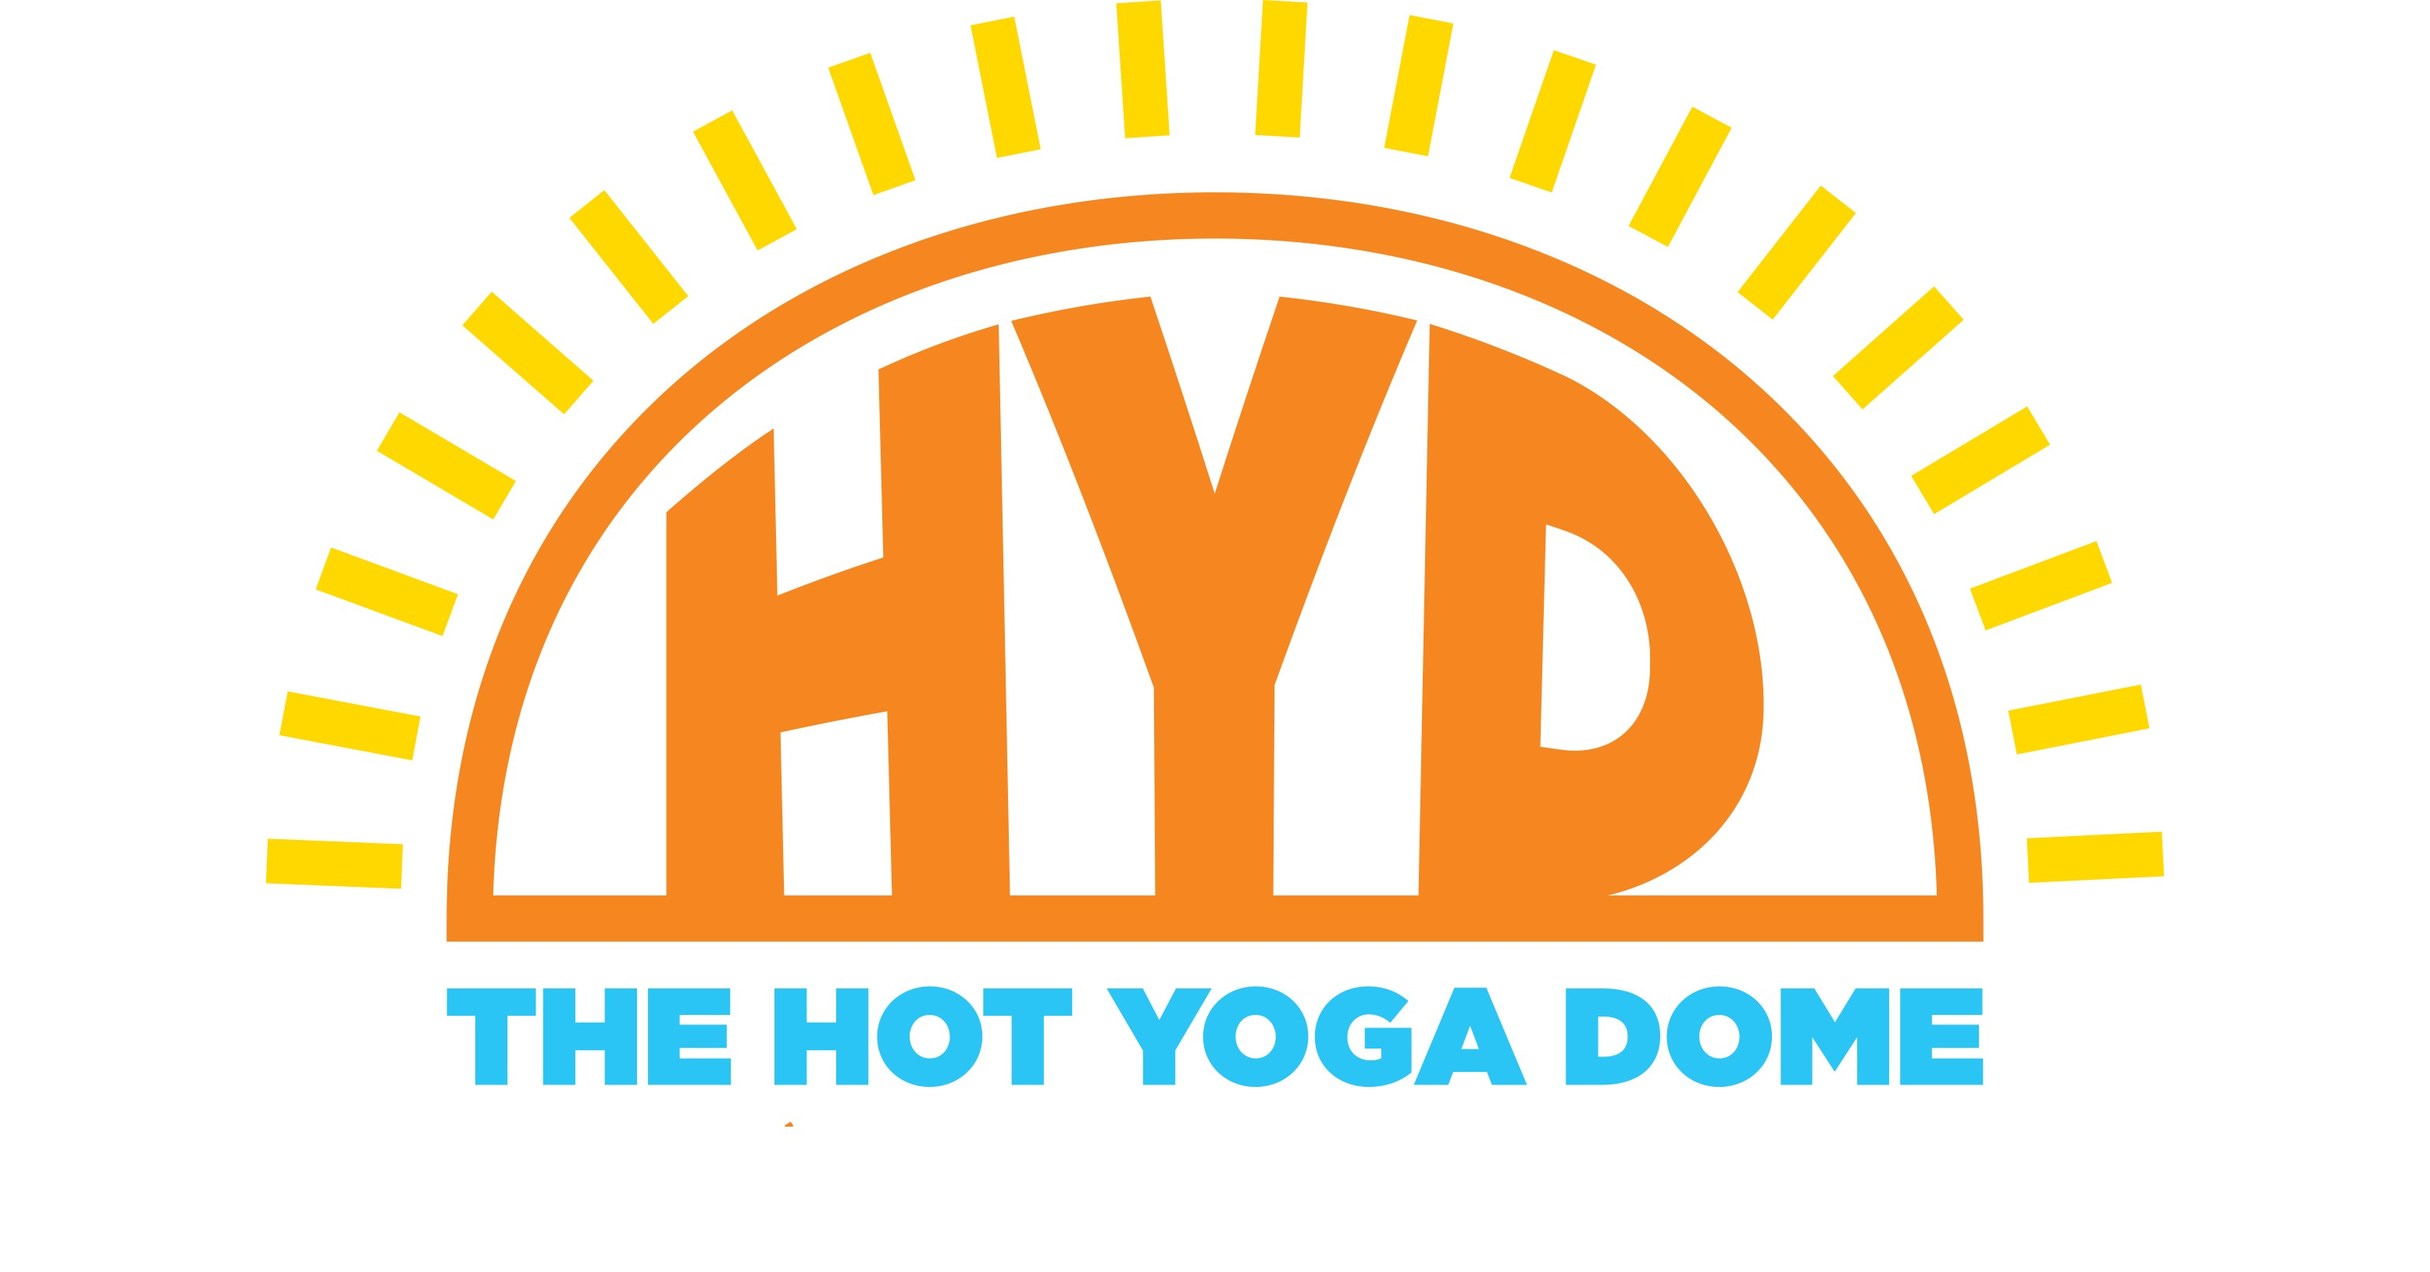 The Hot Yoga Dome Adds the Tiny Dome to their Line of First-to